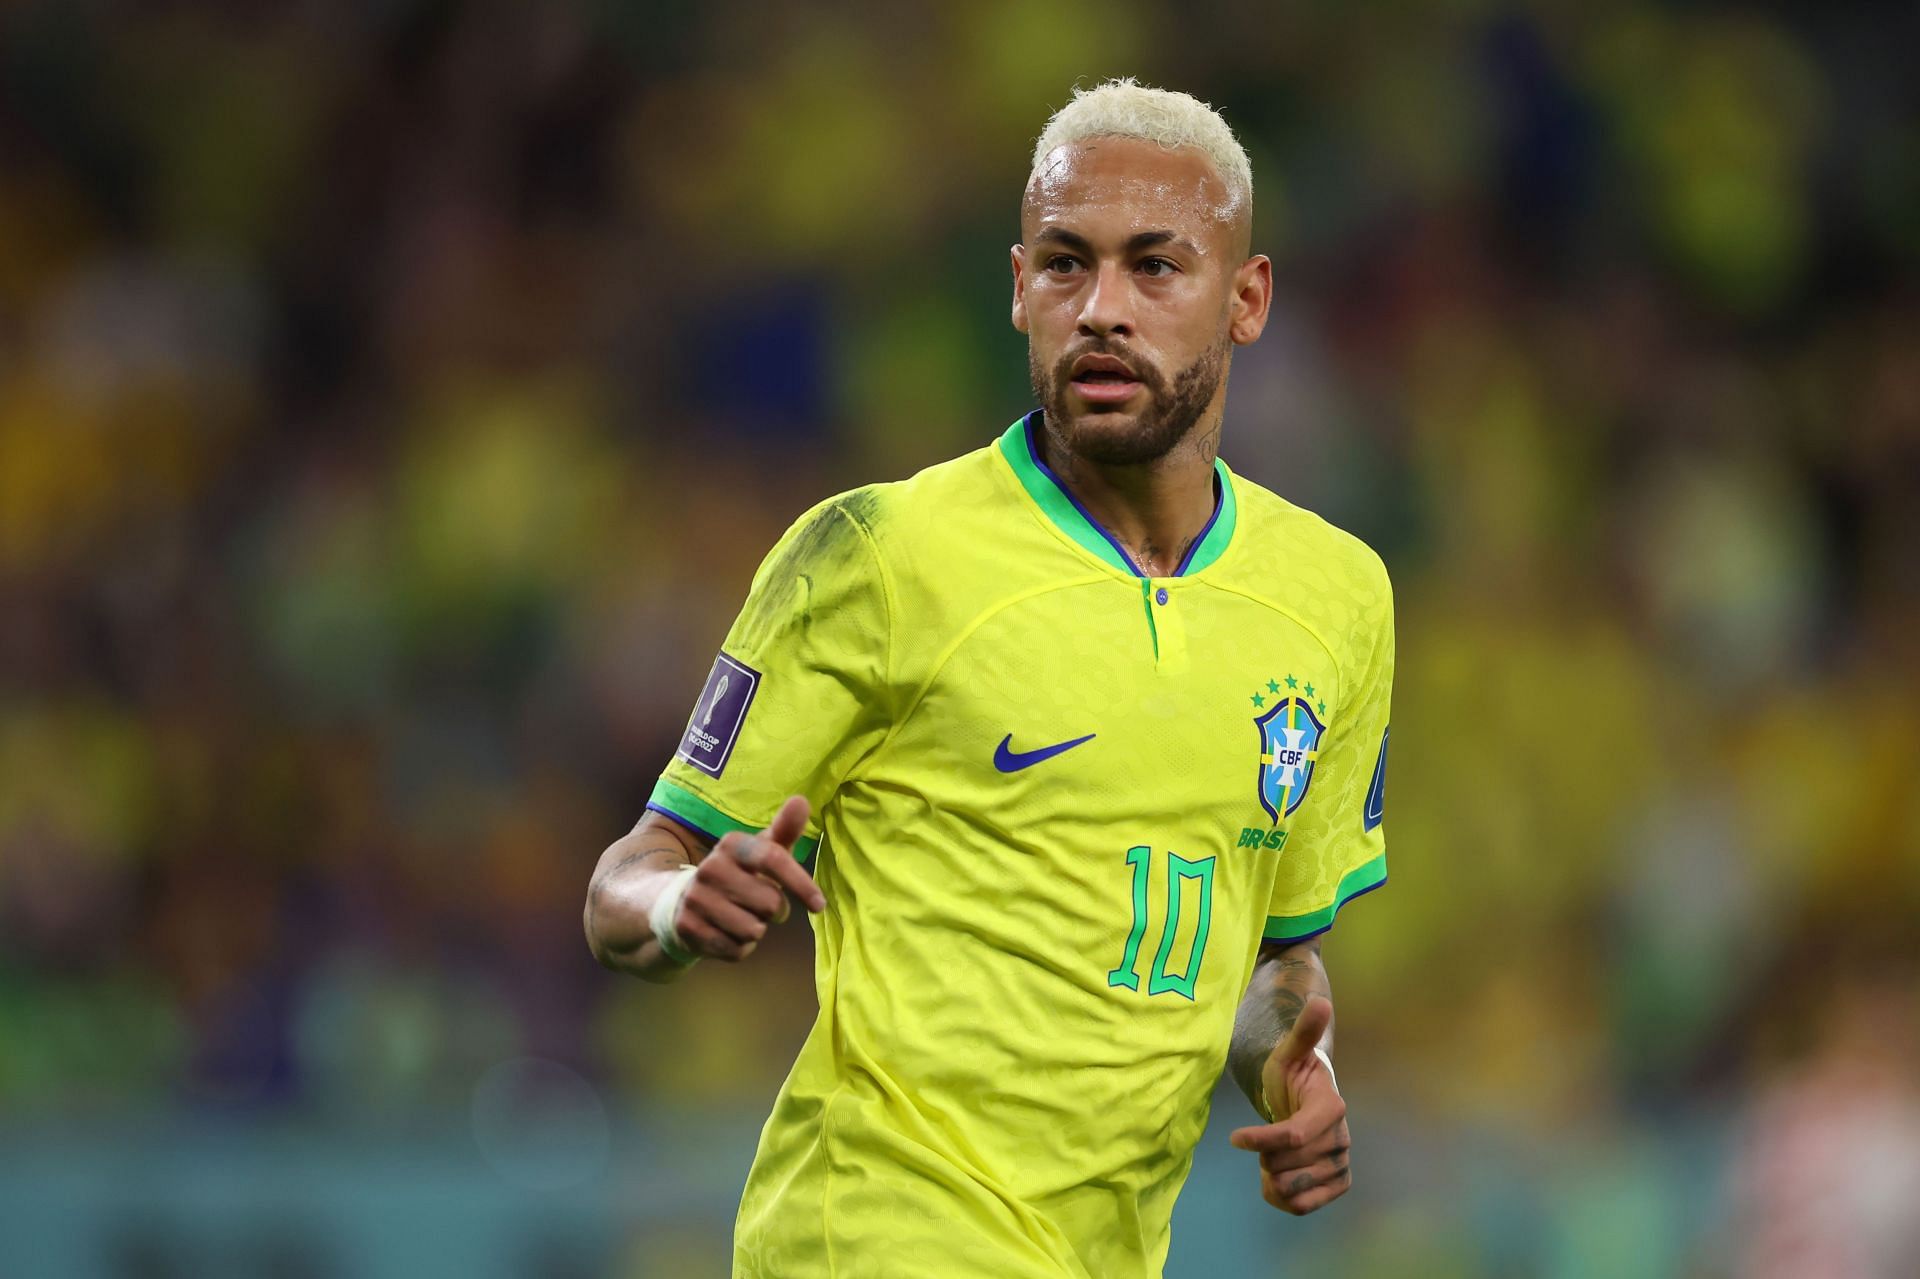 Neymar has exited the 2022 FIFA World Cup.